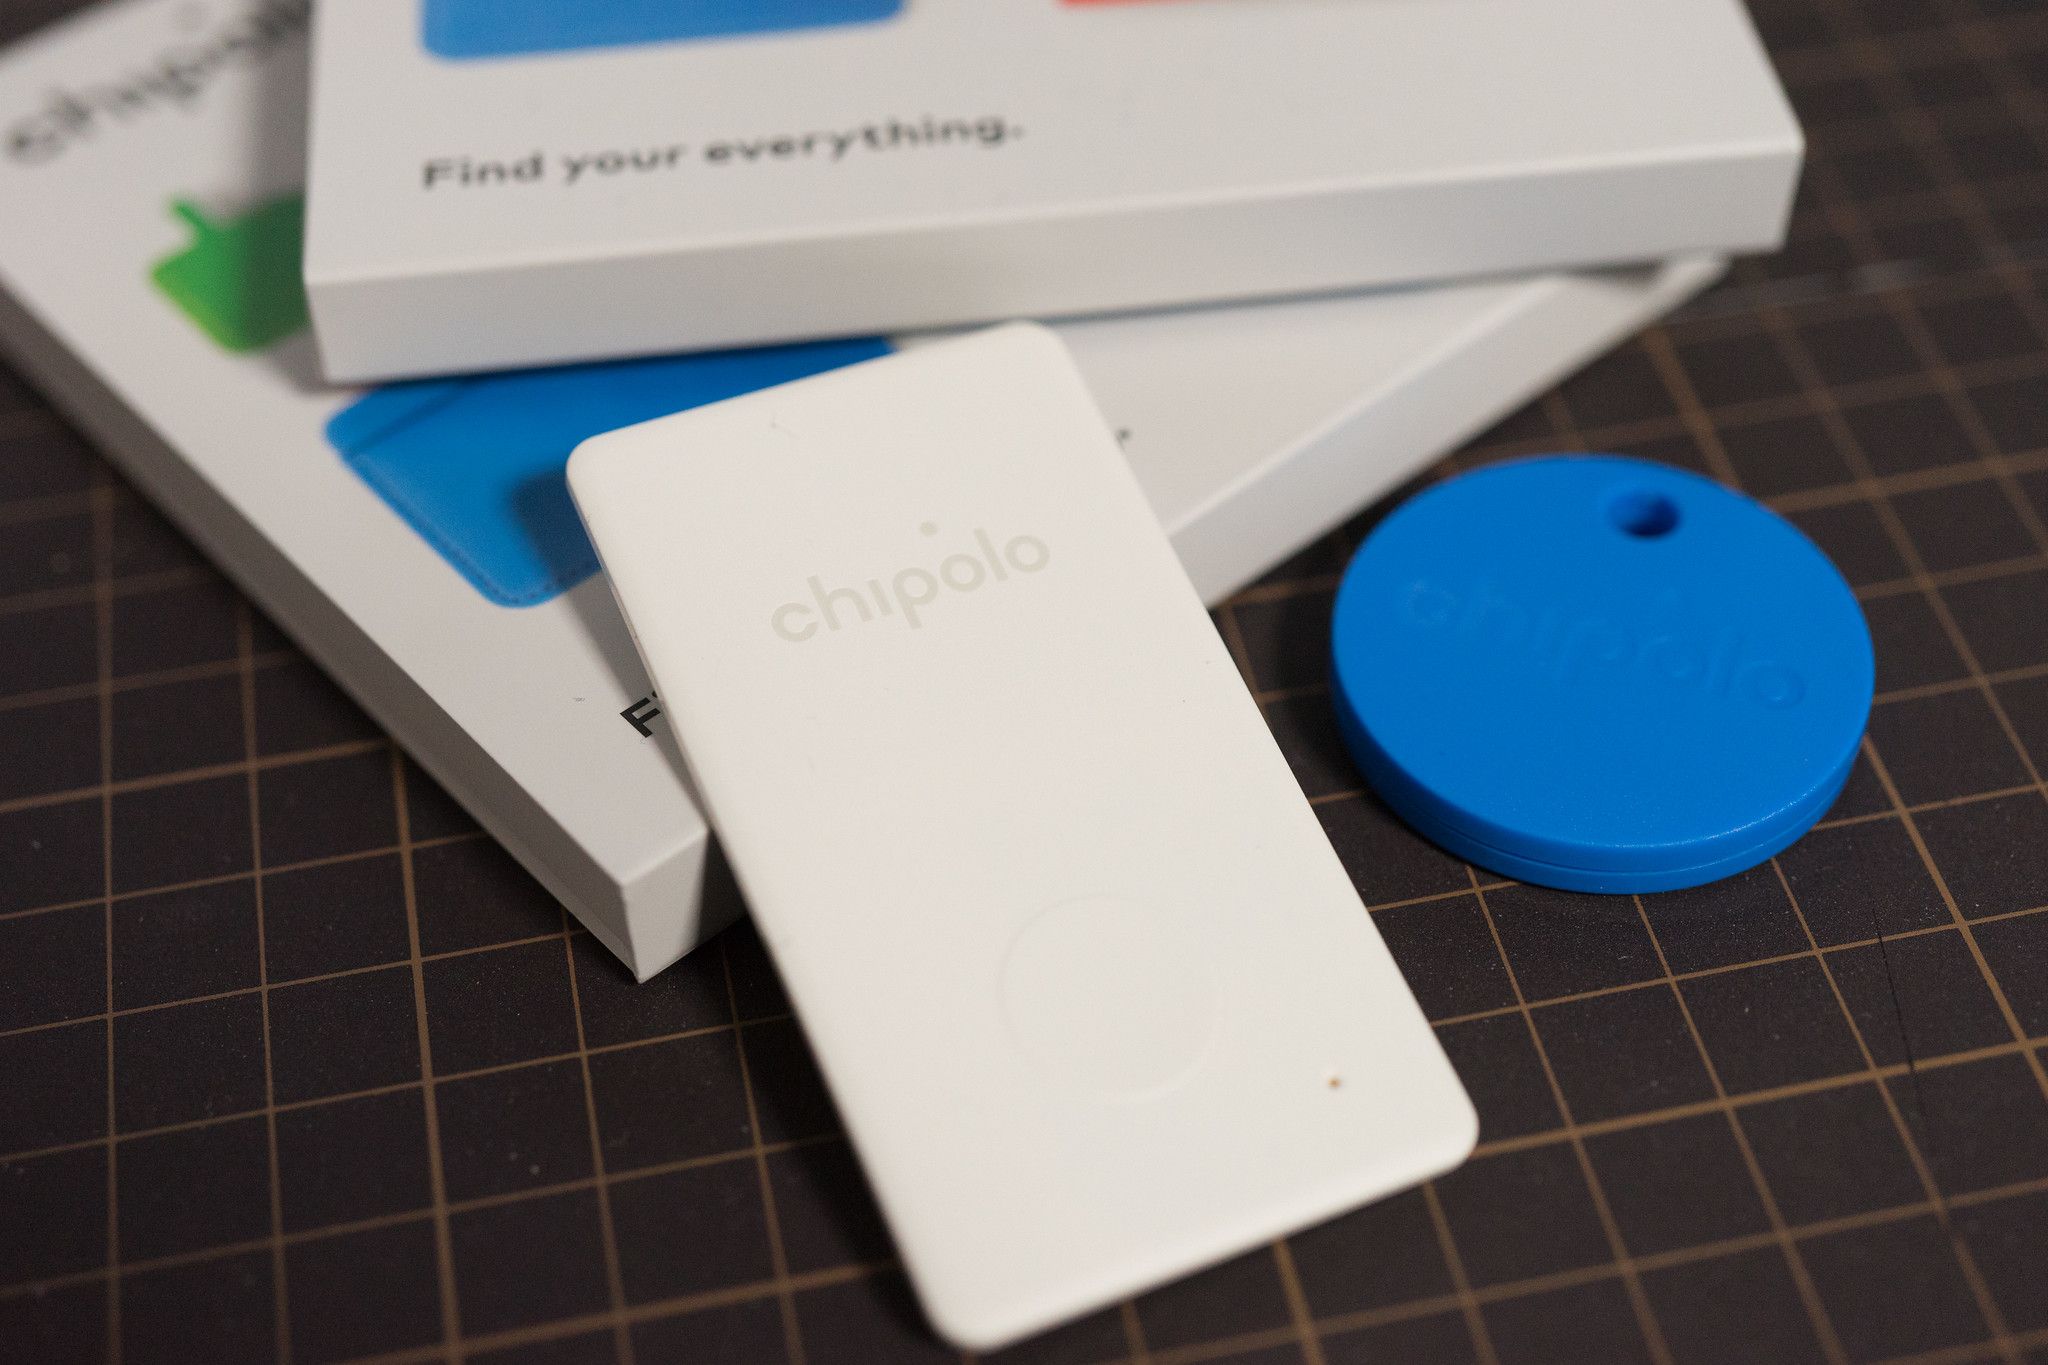 chipolo bluetooth tracker with paper - AirTags, Tile e Chipolo: come funzionano i tracker Bluetooth?